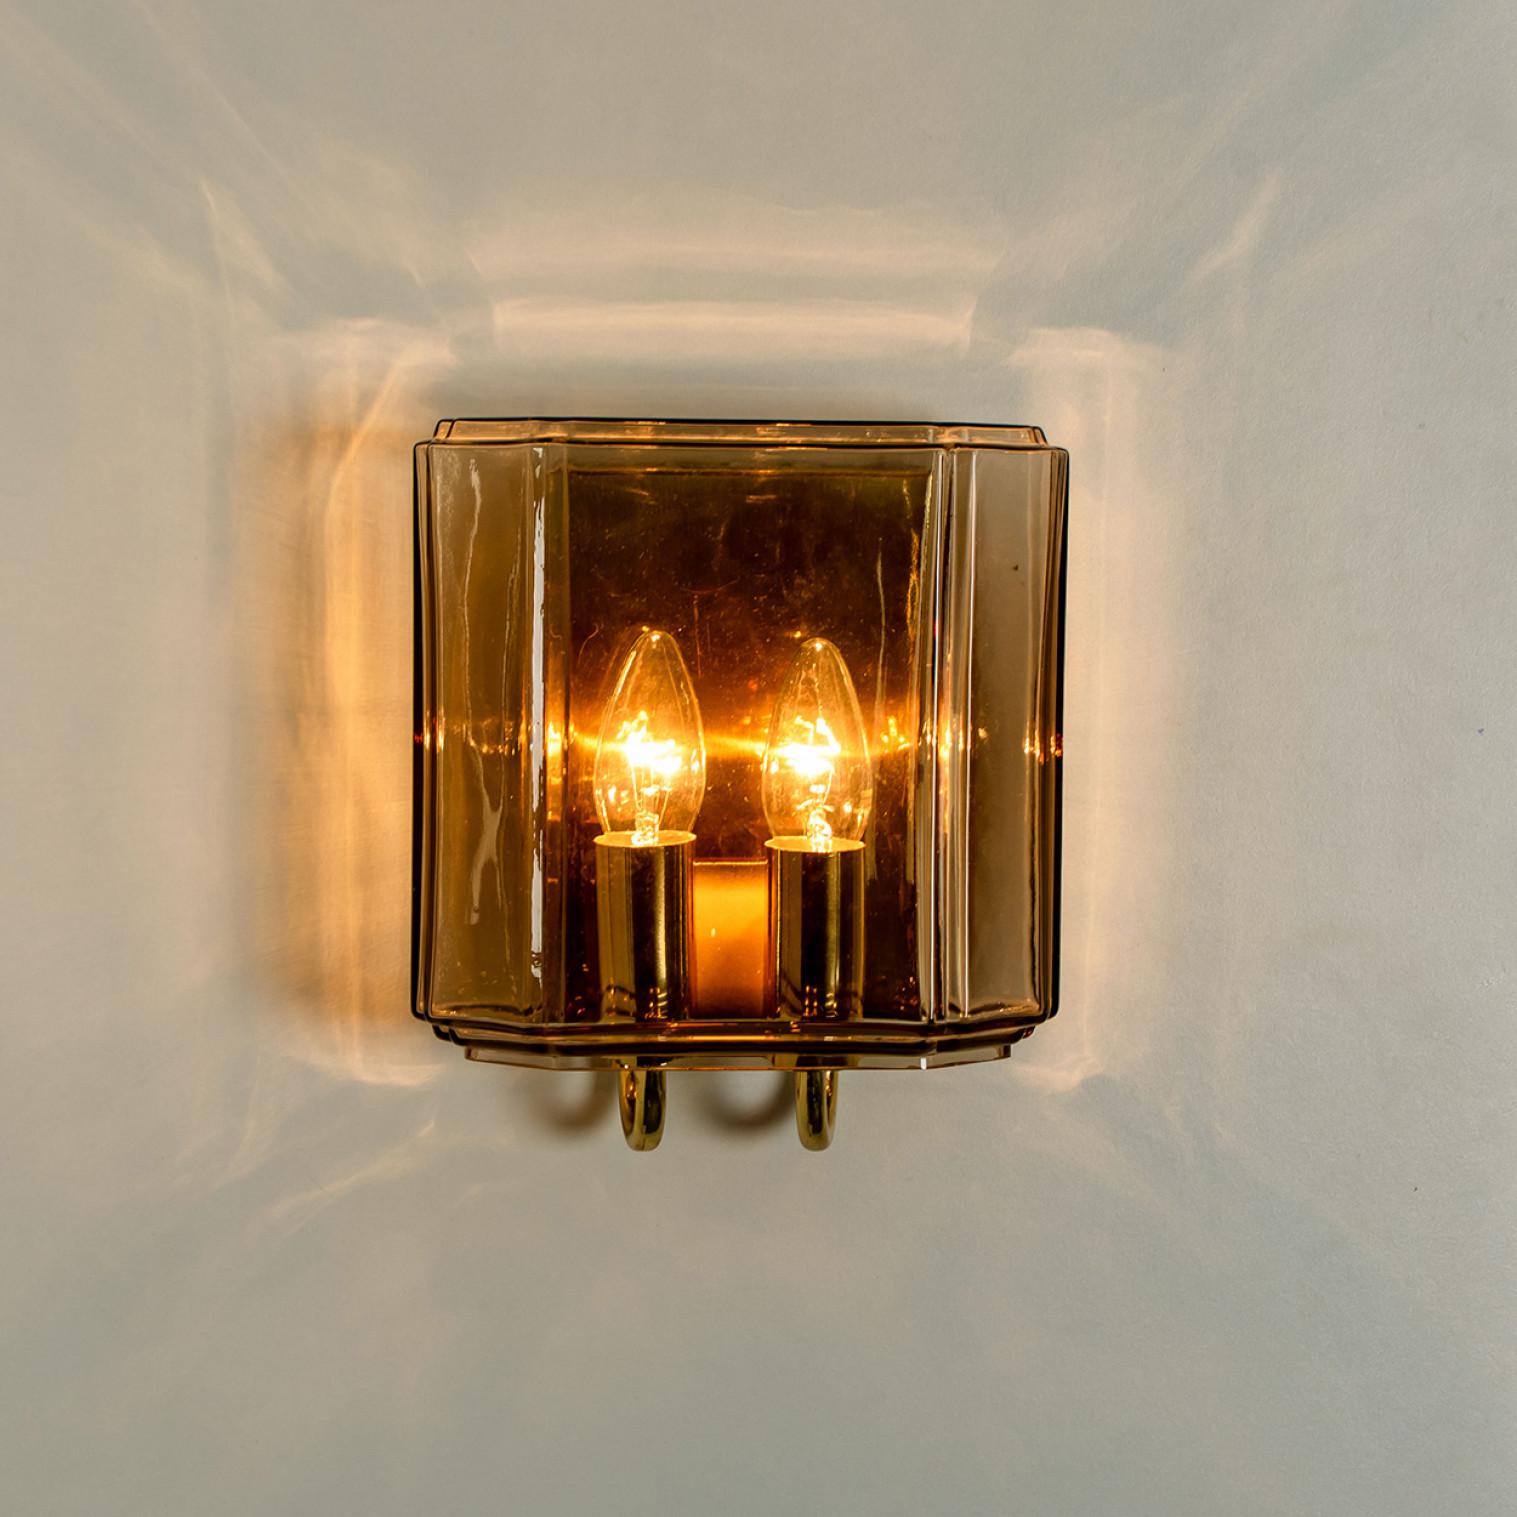 One of the two Pairs of Smoked Glass Wall Lights Sconces by Glashütte Limburg, 1 For Sale 2